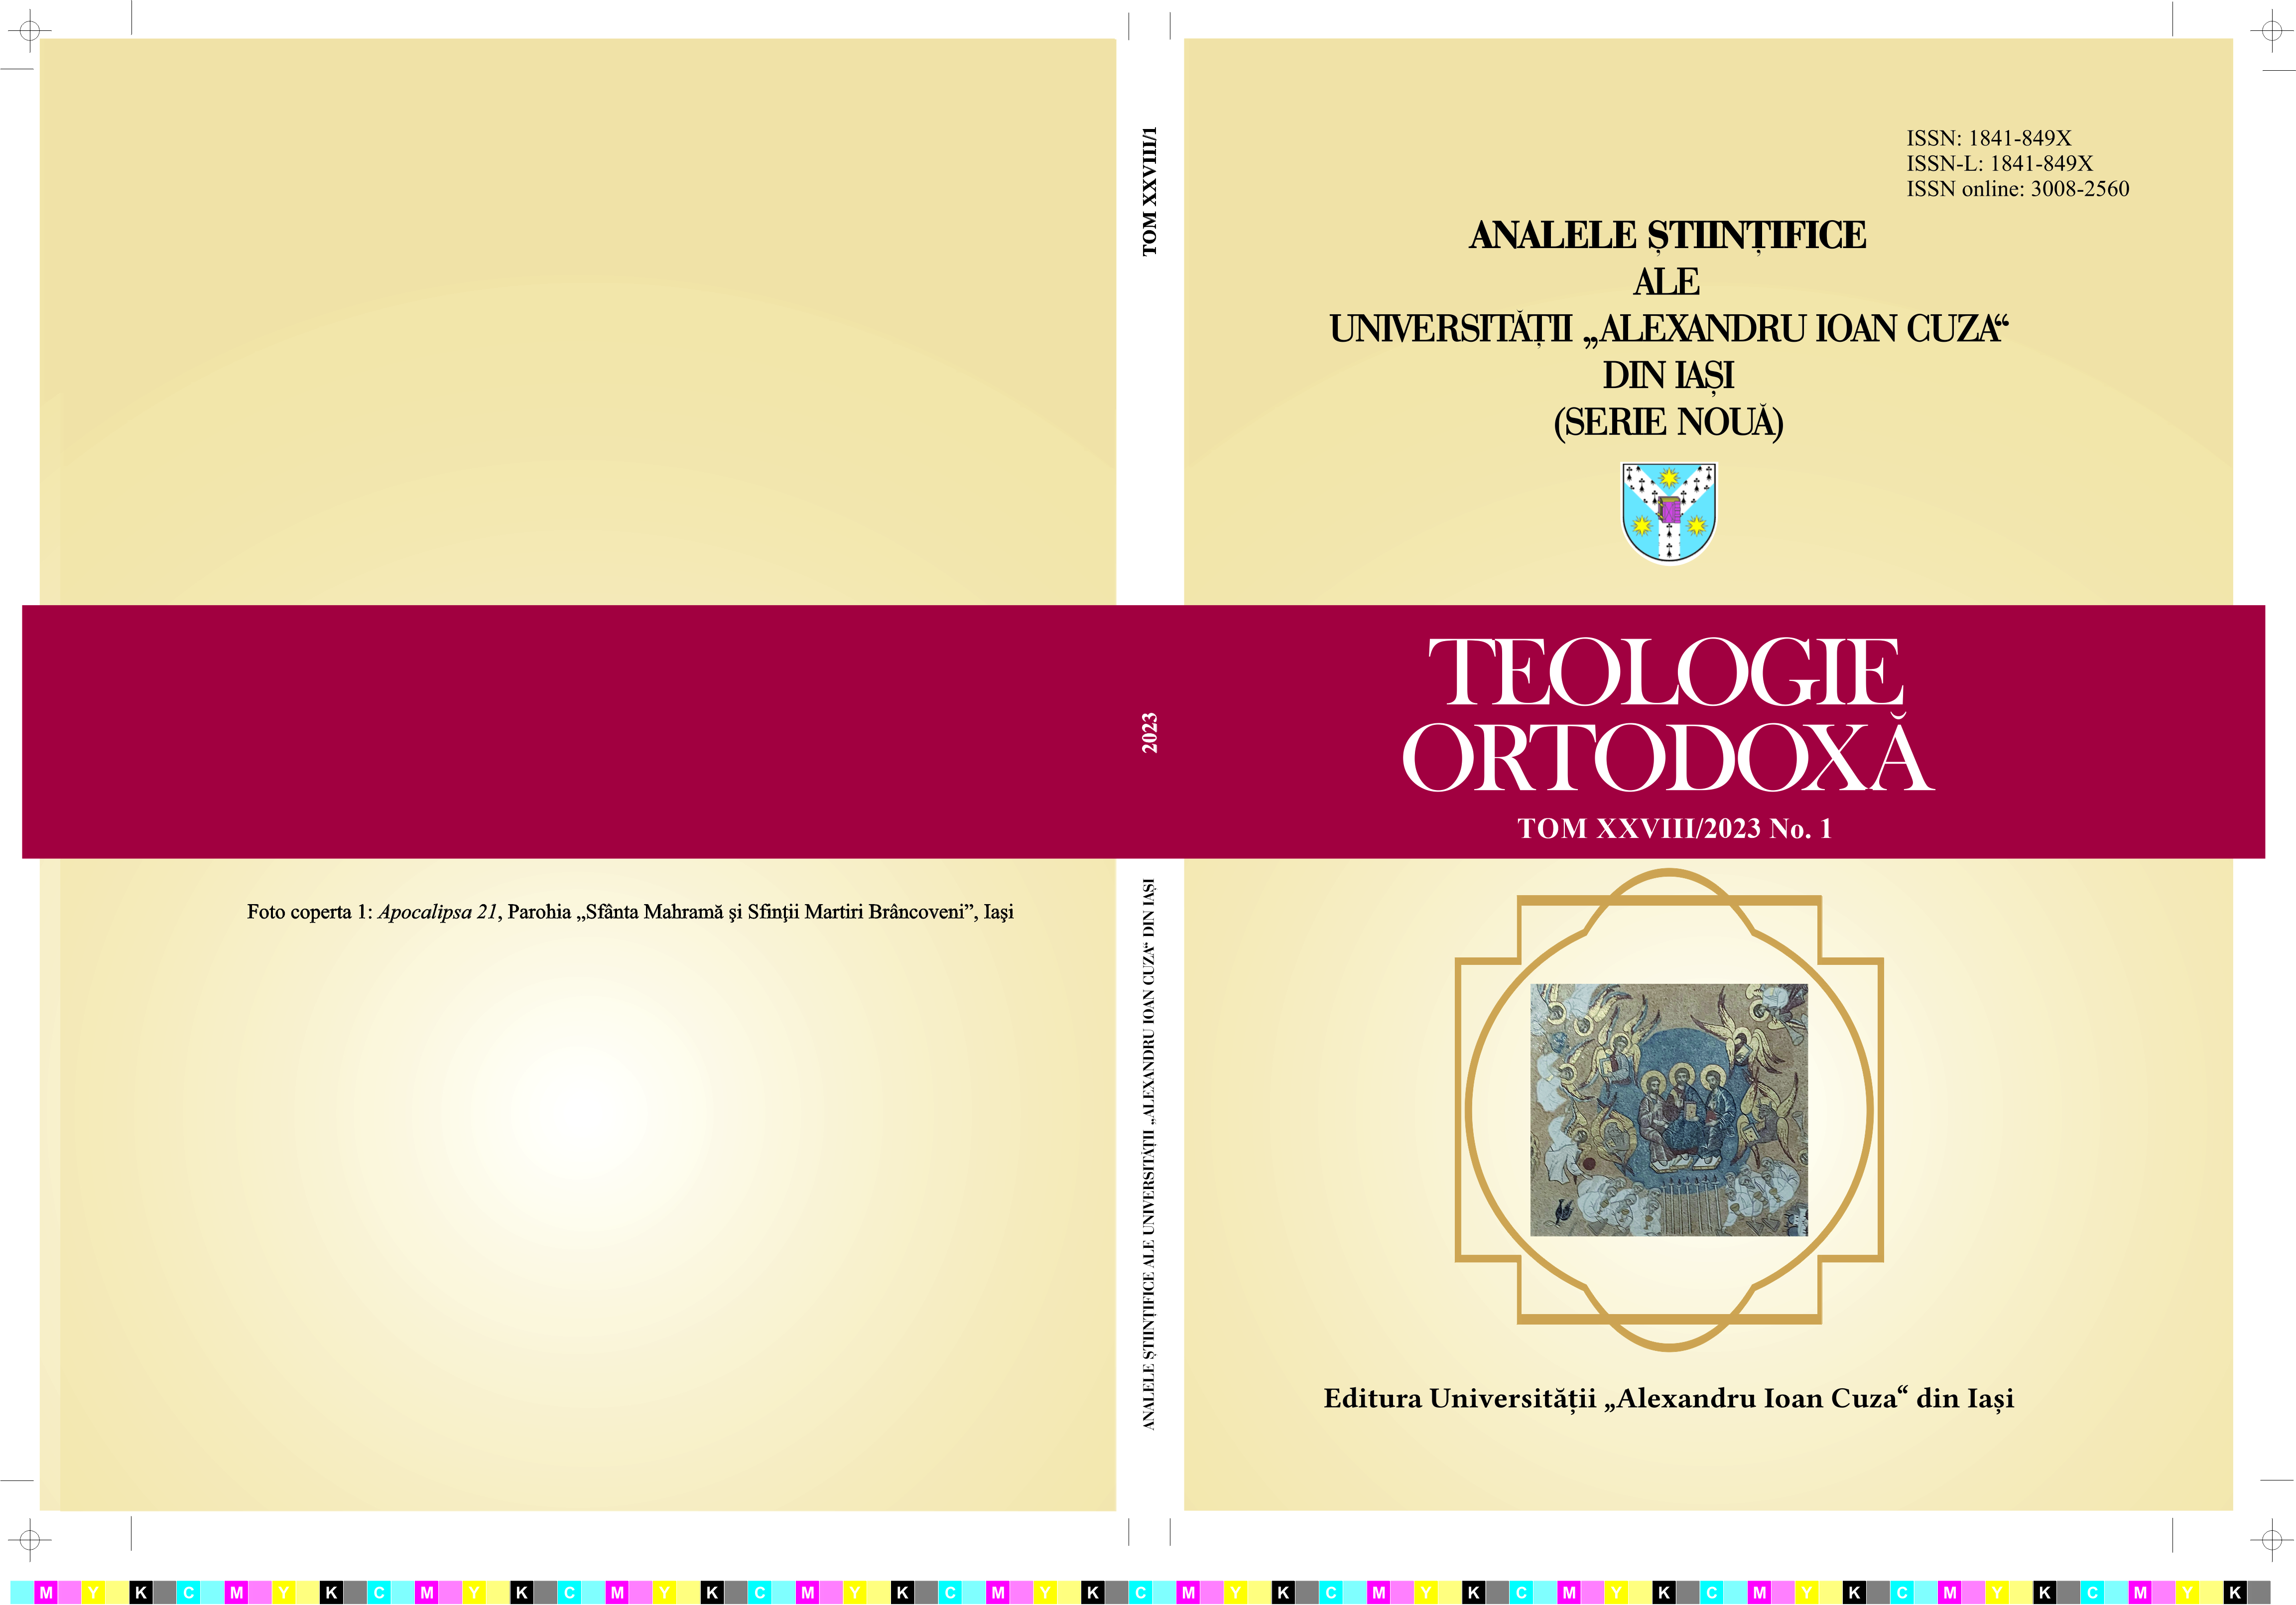 Human being in the metamorphosis of contemporary ideologies: Orthodox Christian references for authenticity